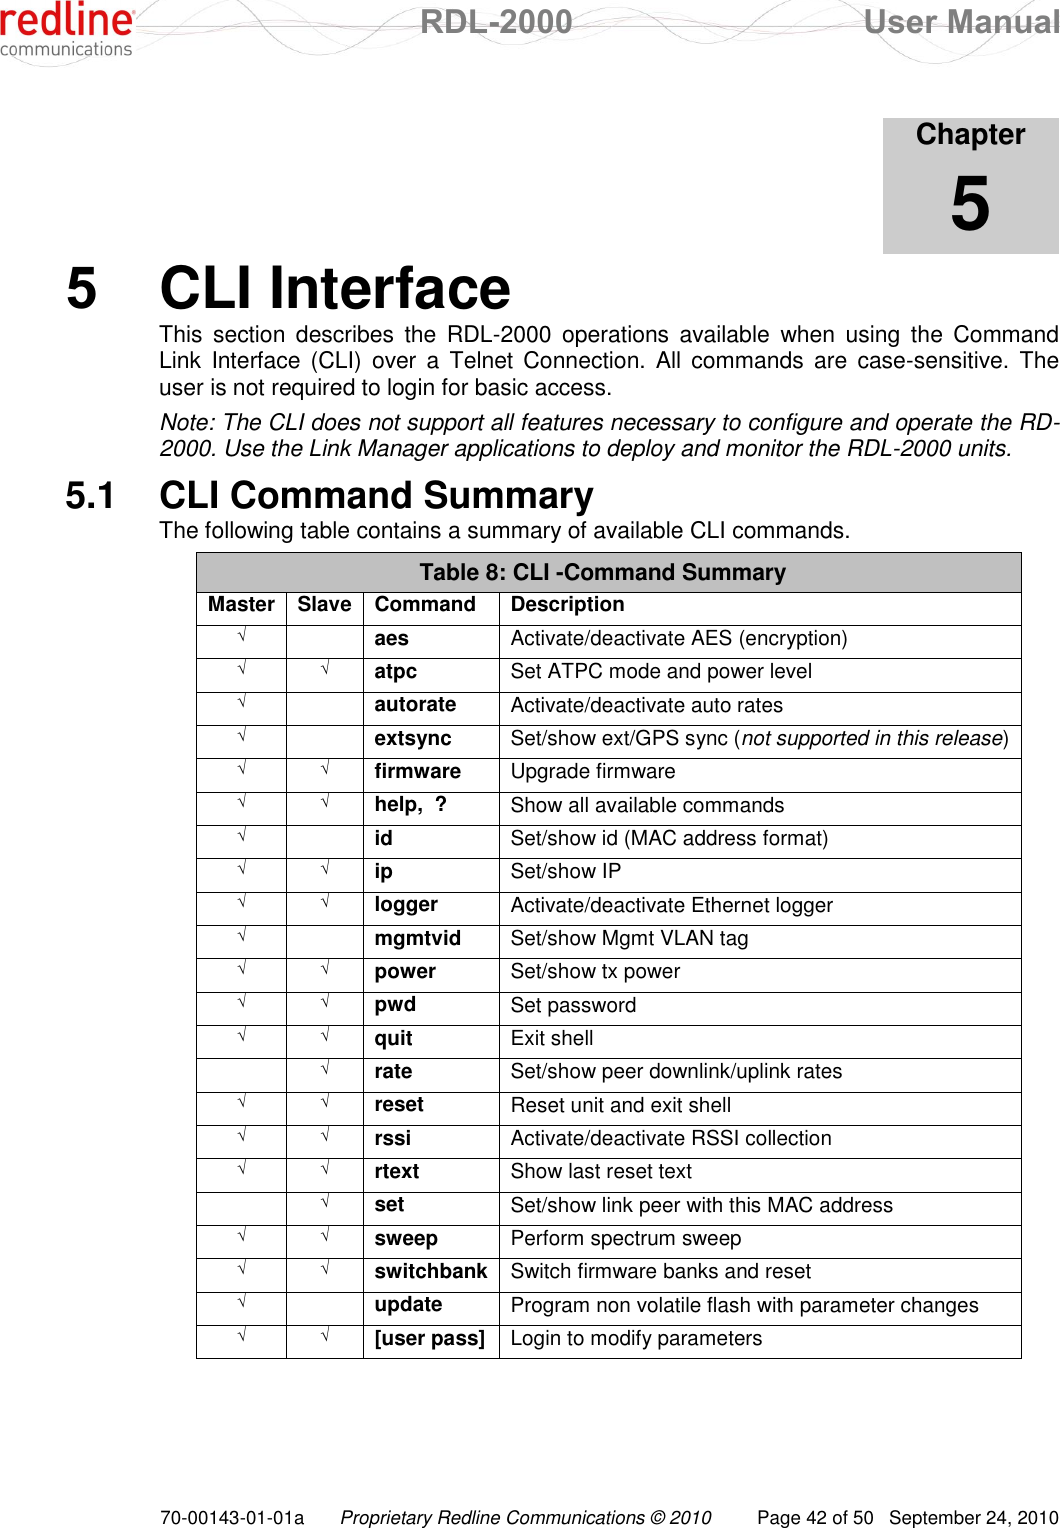  RDL-2000  User Manual 70-00143-01-01a Proprietary Redline Communications © 2010  Page 42 of 50  September 24, 2010            Chapter 5 5  CLI Interface This  section  describes  the  RDL-2000  operations  available  when  using  the  Command Link  Interface (CLI)  over  a  Telnet  Connection. All commands are  case-sensitive. The user is not required to login for basic access. Note: The CLI does not support all features necessary to configure and operate the RD-2000. Use the Link Manager applications to deploy and monitor the RDL-2000 units. 5.1  CLI Command Summary The following table contains a summary of available CLI commands. Table 8: CLI -Command Summary Master Slave Command Description √  aes Activate/deactivate AES (encryption) √ √ atpc Set ATPC mode and power level √  autorate Activate/deactivate auto rates √  extsync Set/show ext/GPS sync (not supported in this release) √ √ firmware Upgrade firmware √ √ help,  ? Show all available commands √  id  Set/show id (MAC address format) √ √ ip Set/show IP √ √ logger Activate/deactivate Ethernet logger √  mgmtvid Set/show Mgmt VLAN tag √ √ power Set/show tx power √ √ pwd Set password √ √ quit Exit shell  √ rate Set/show peer downlink/uplink rates √ √ reset Reset unit and exit shell √ √ rssi Activate/deactivate RSSI collection √ √ rtext Show last reset text  √ set Set/show link peer with this MAC address √ √ sweep Perform spectrum sweep √ √ switchbank Switch firmware banks and reset √  update Program non volatile flash with parameter changes √ √ [user pass] Login to modify parameters  